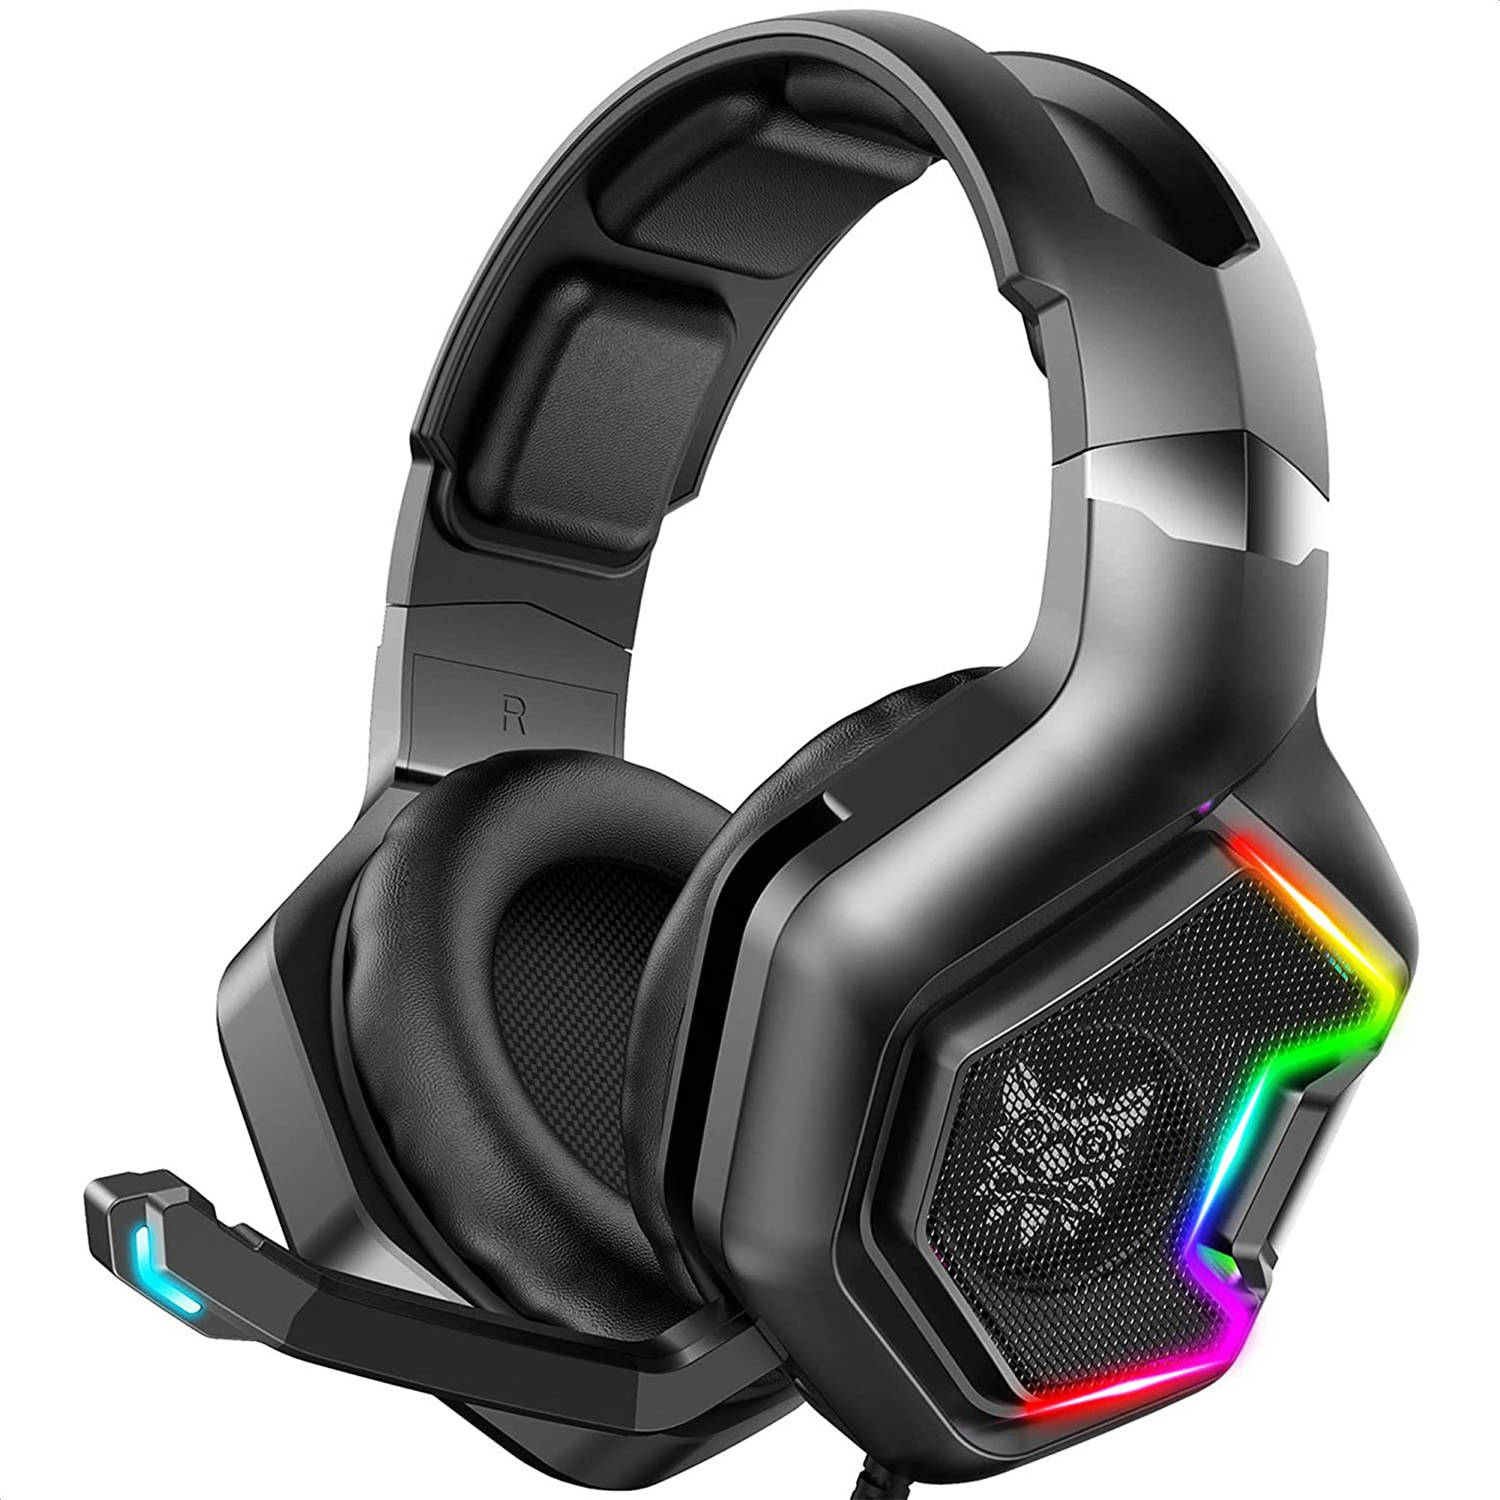 Strex Gaming Headset Met Microfoon Rgb Verlichting 7.1 Surround Sound Pc + Ps4 + Ps5 + Xbox One